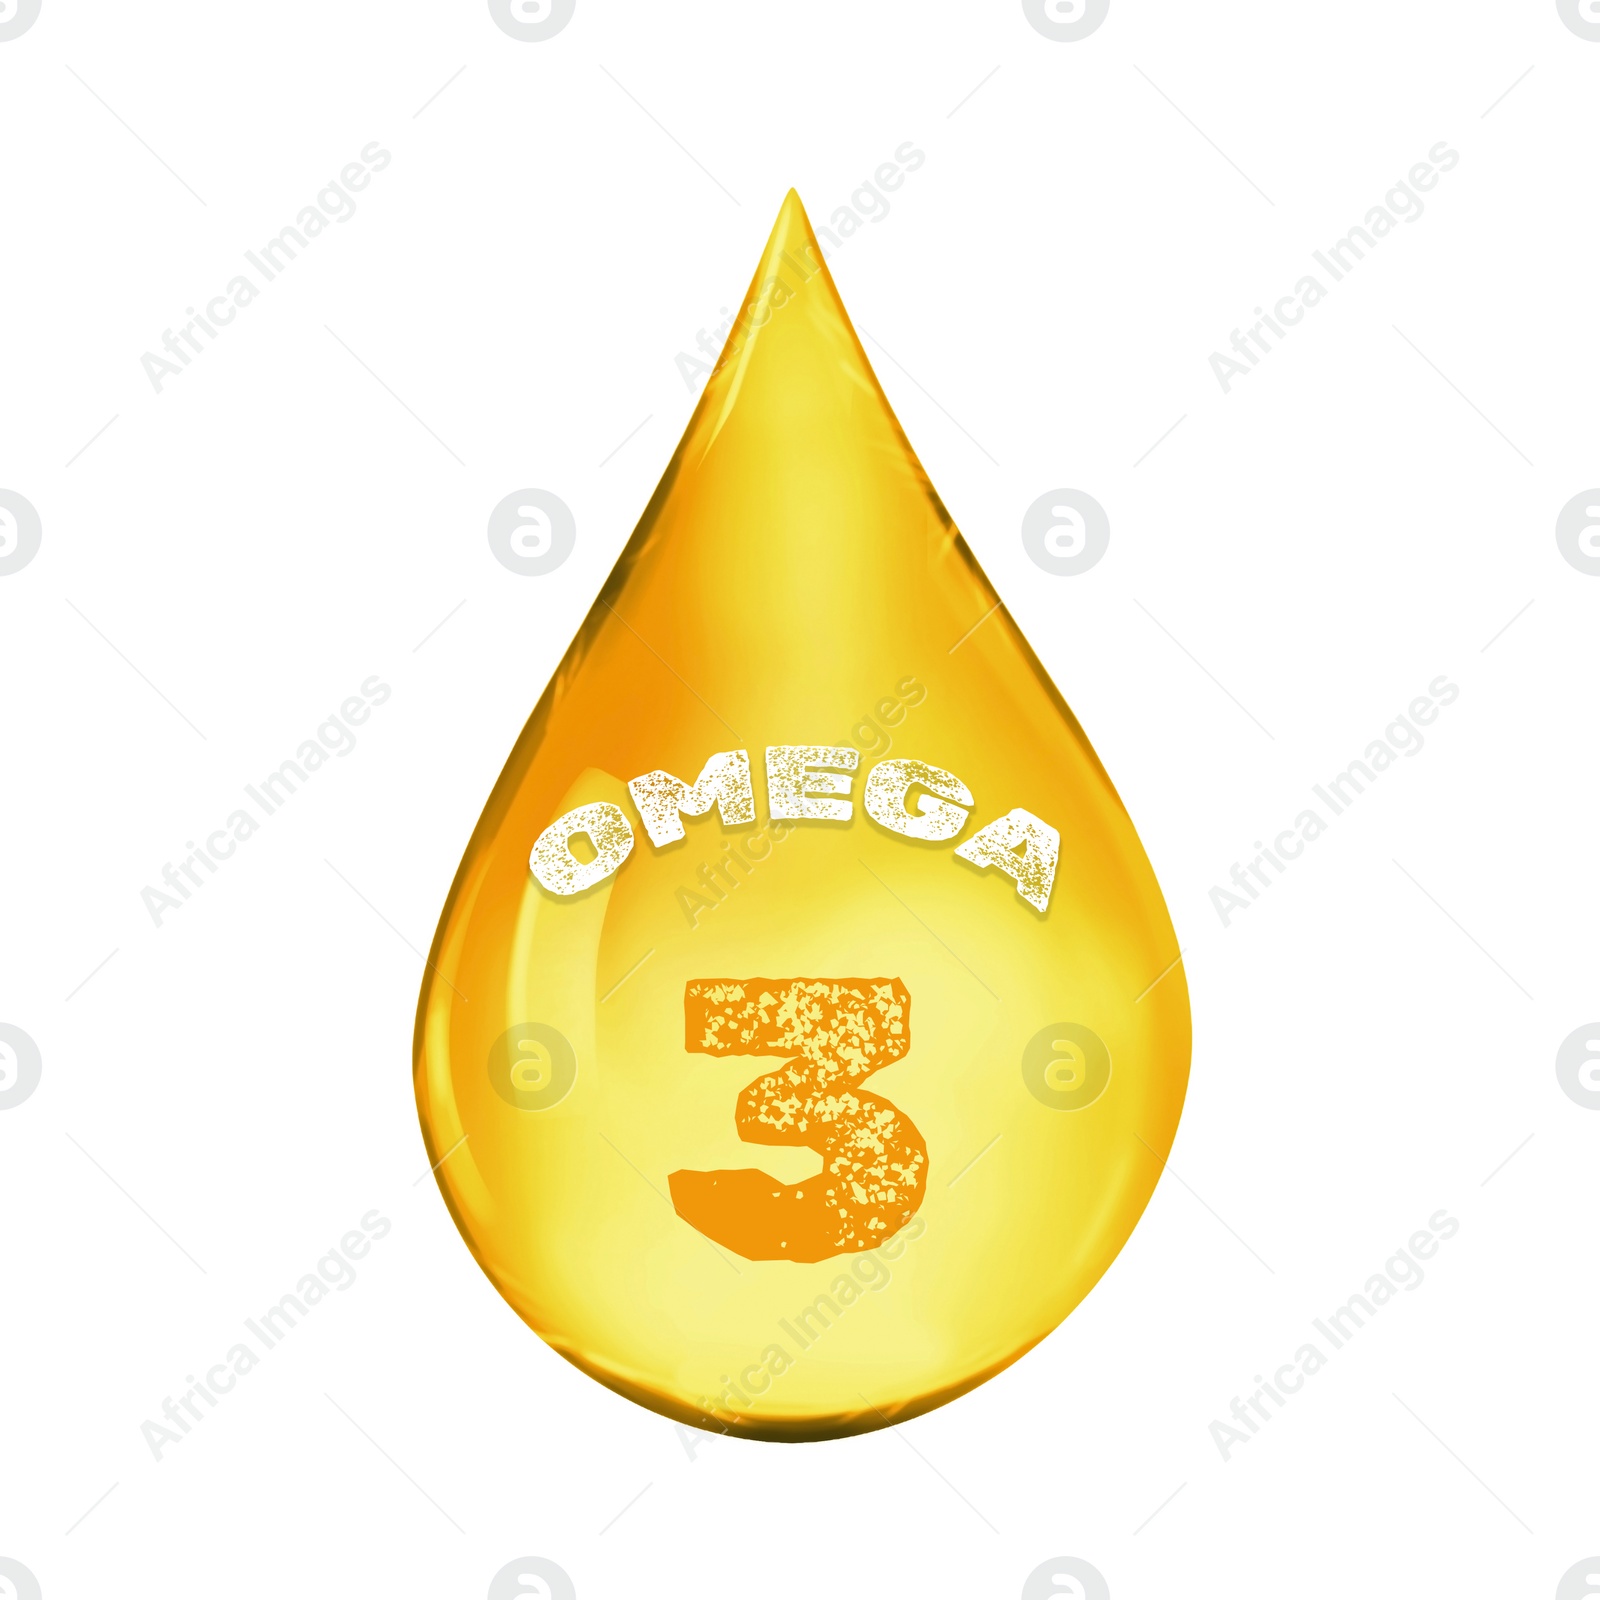 Image of Golden Omega 3 oil drop isolated on white